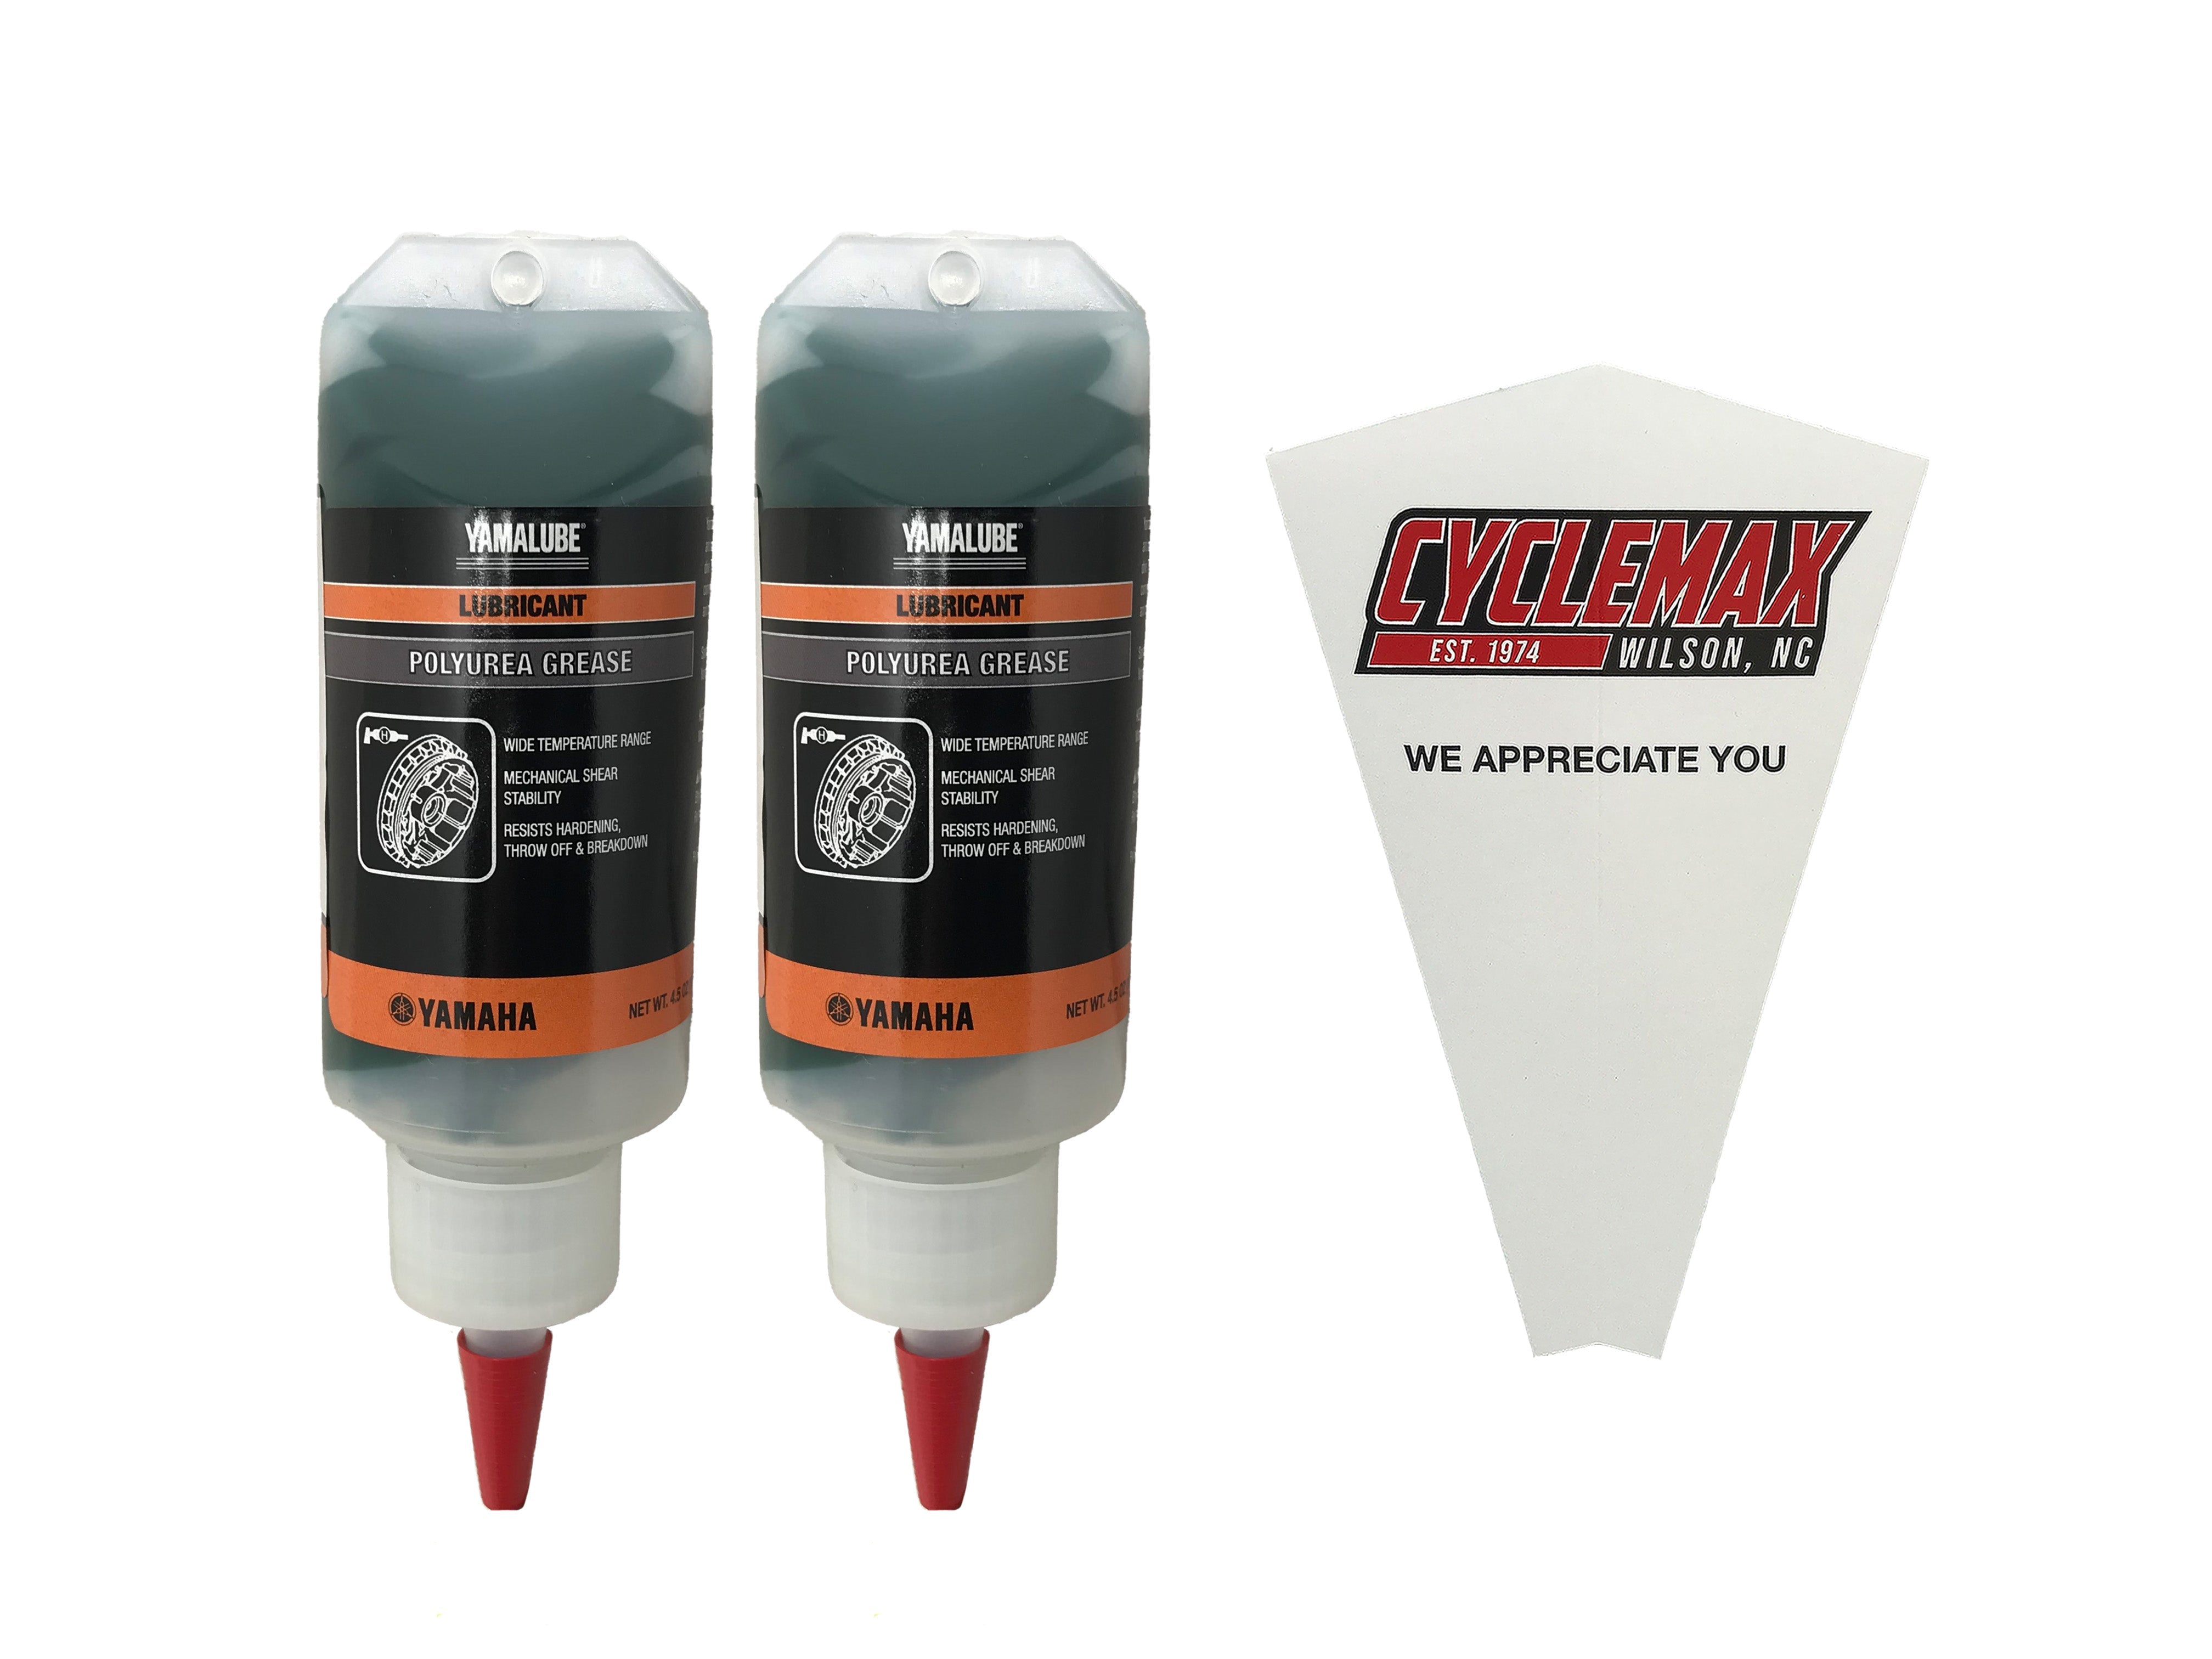 Cyclemax Two Pack for Yamaha Yamalube Polyurea Grease ACC-POLYG-RS-05 Contains Two 4.5oz Tubes and a Funnel